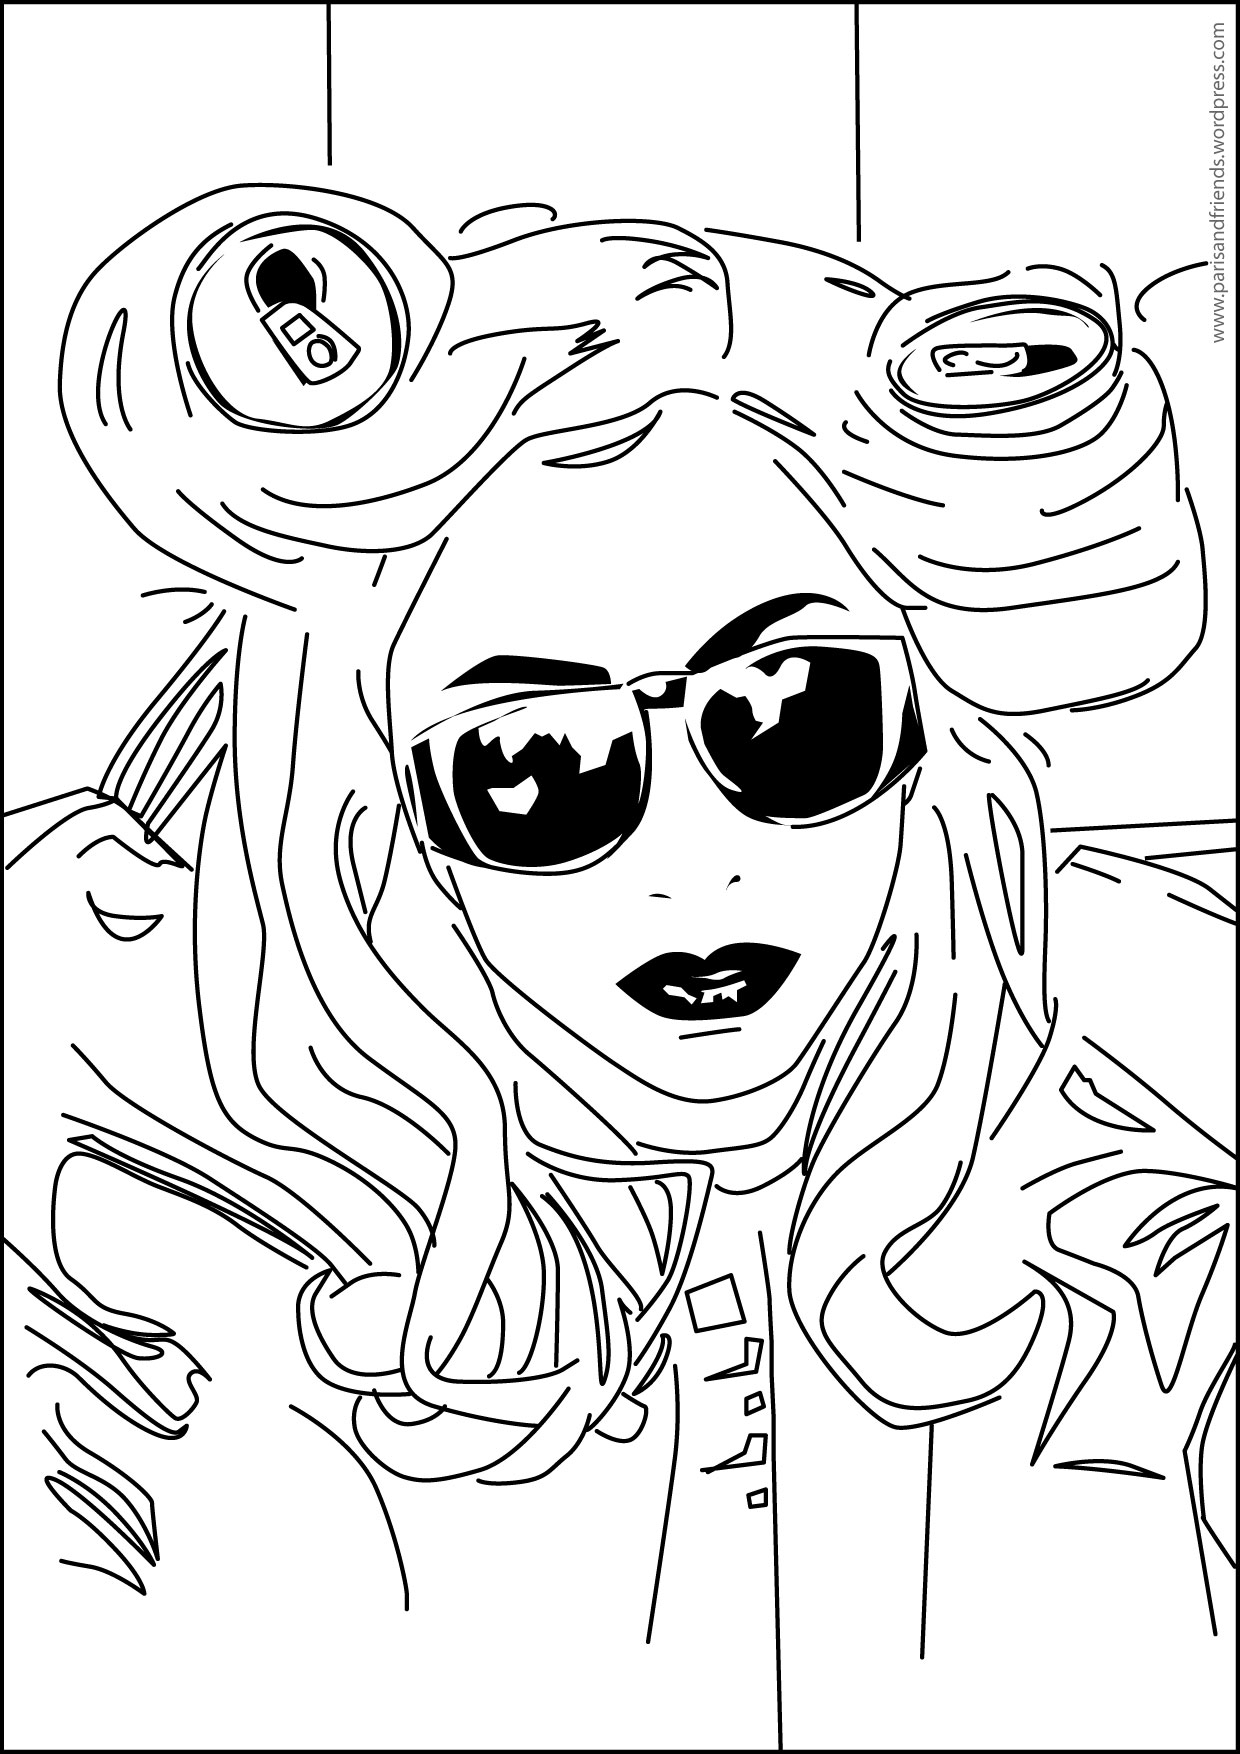 Download Lady Gaga #123953 (Celebrities) - Printable coloring pages